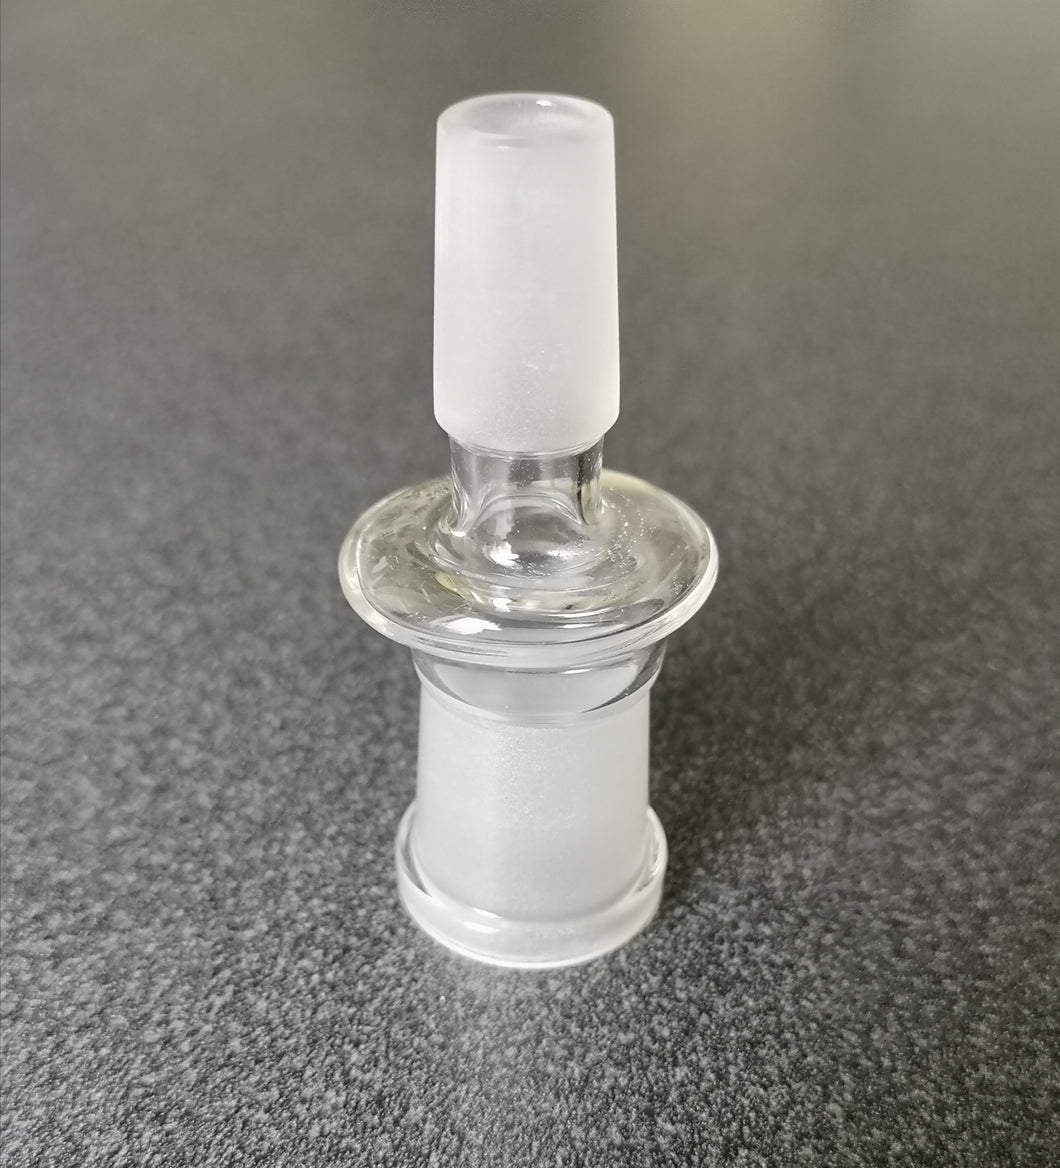 18mm to 14mm Glass Reducer - Adapter 